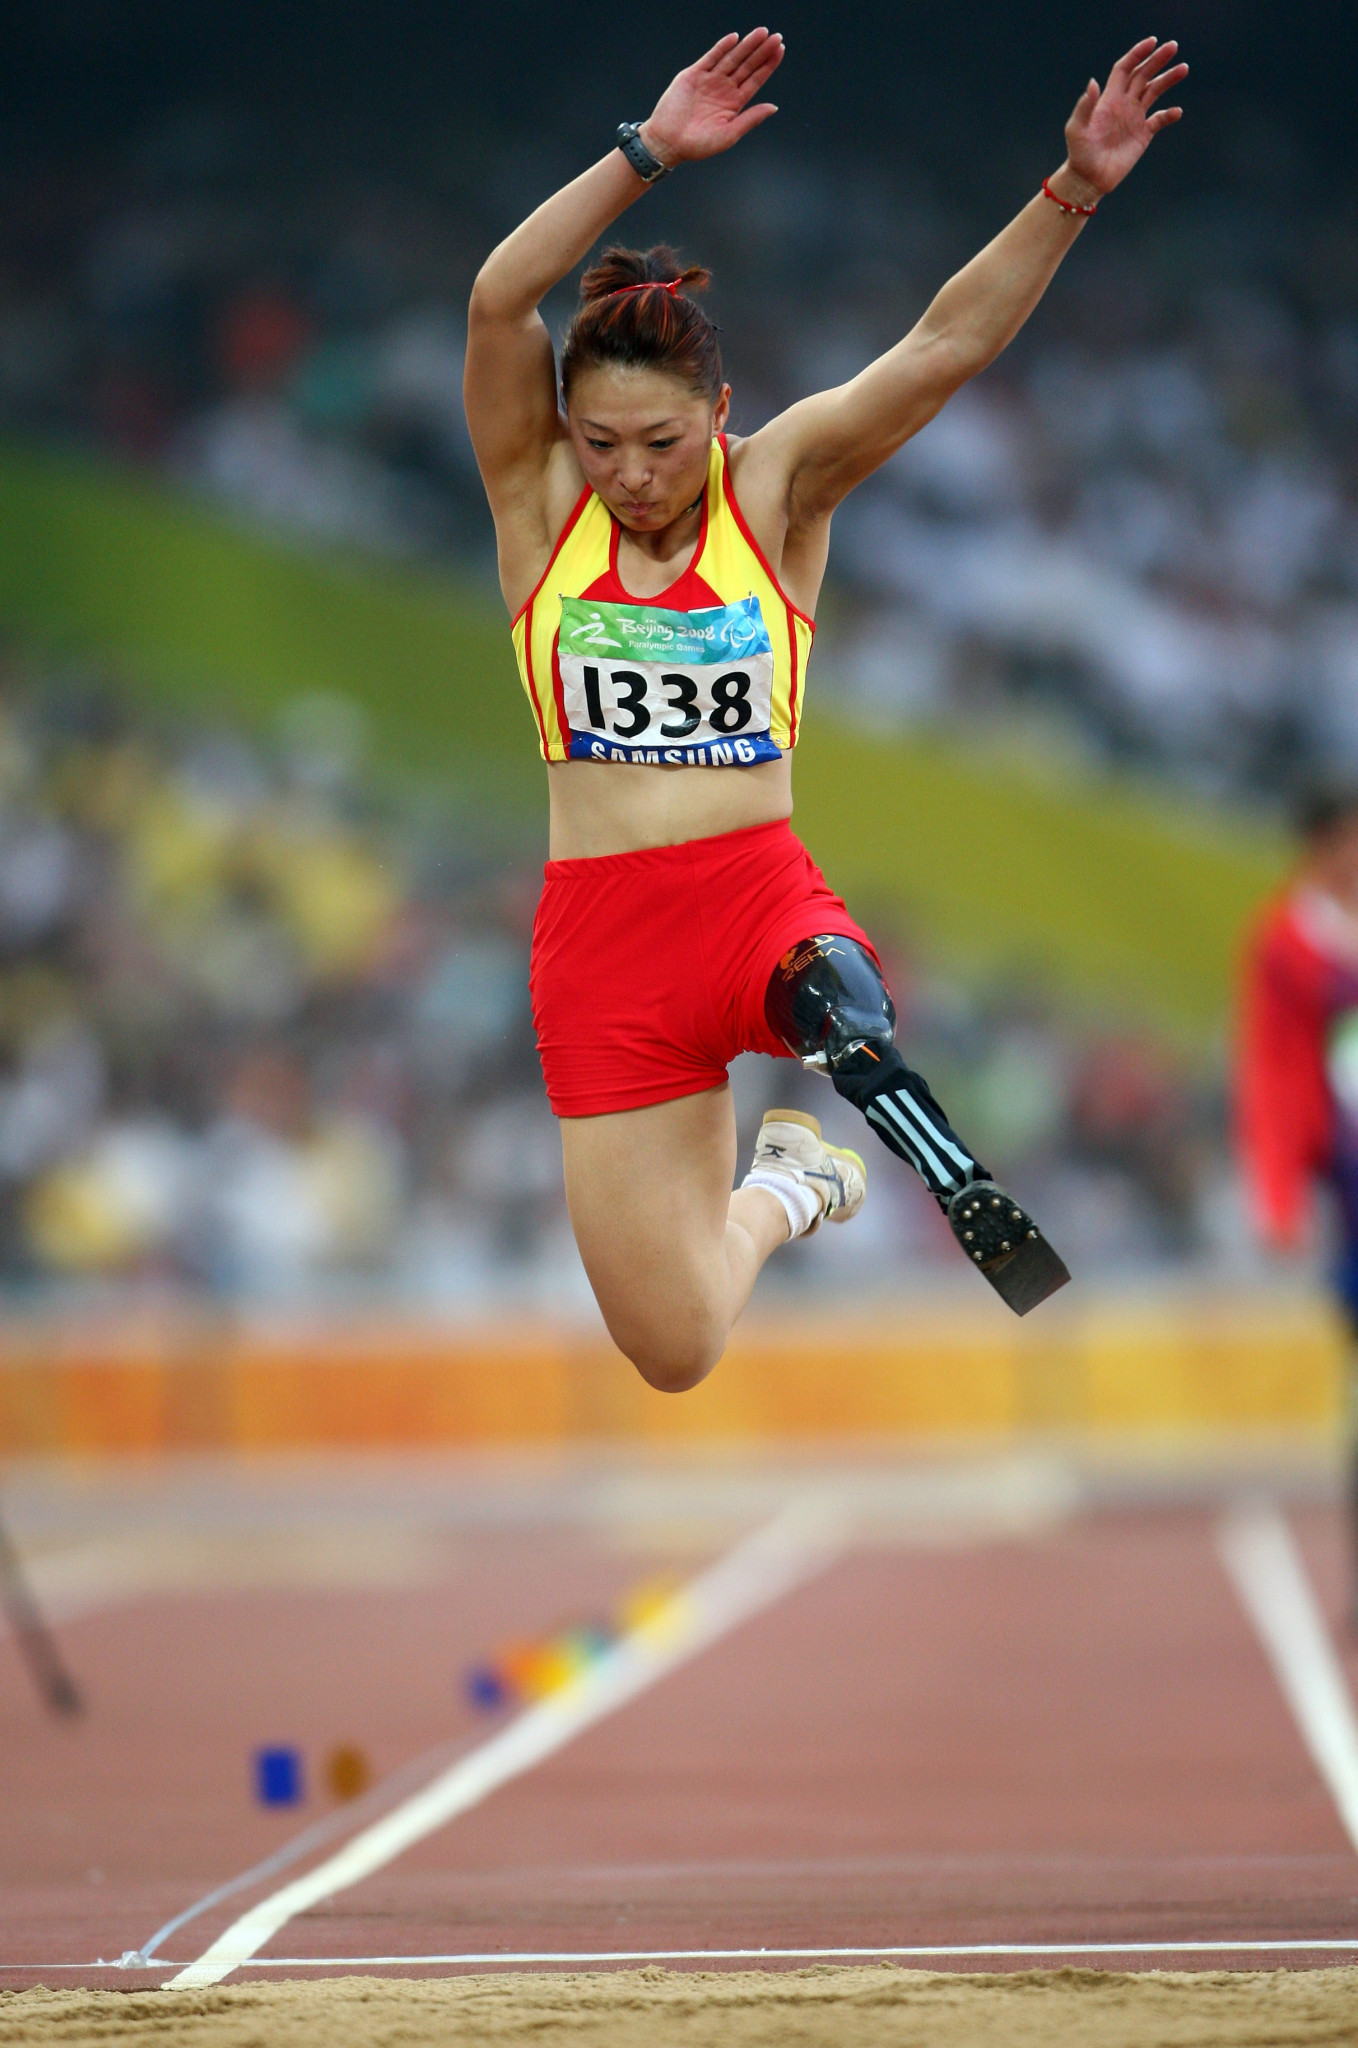 Zhang Haiyuan won gold at the 2004 Summer Paralympic Games in Athens ©Getty Images